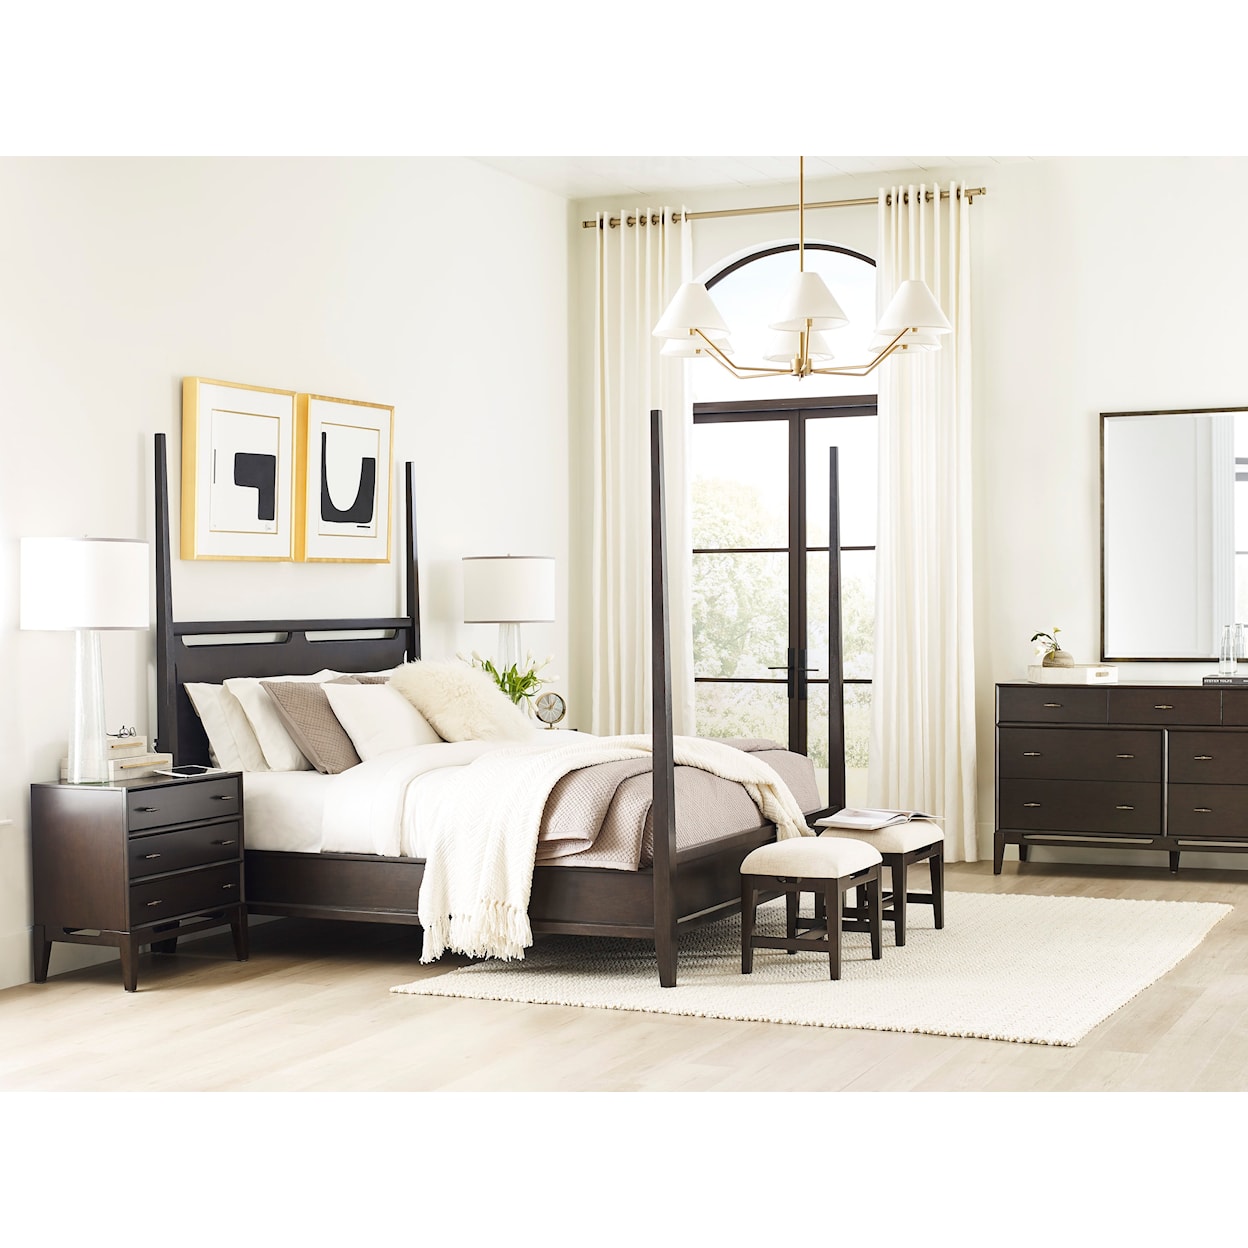 Aspenhome Sutton King Poster Bed